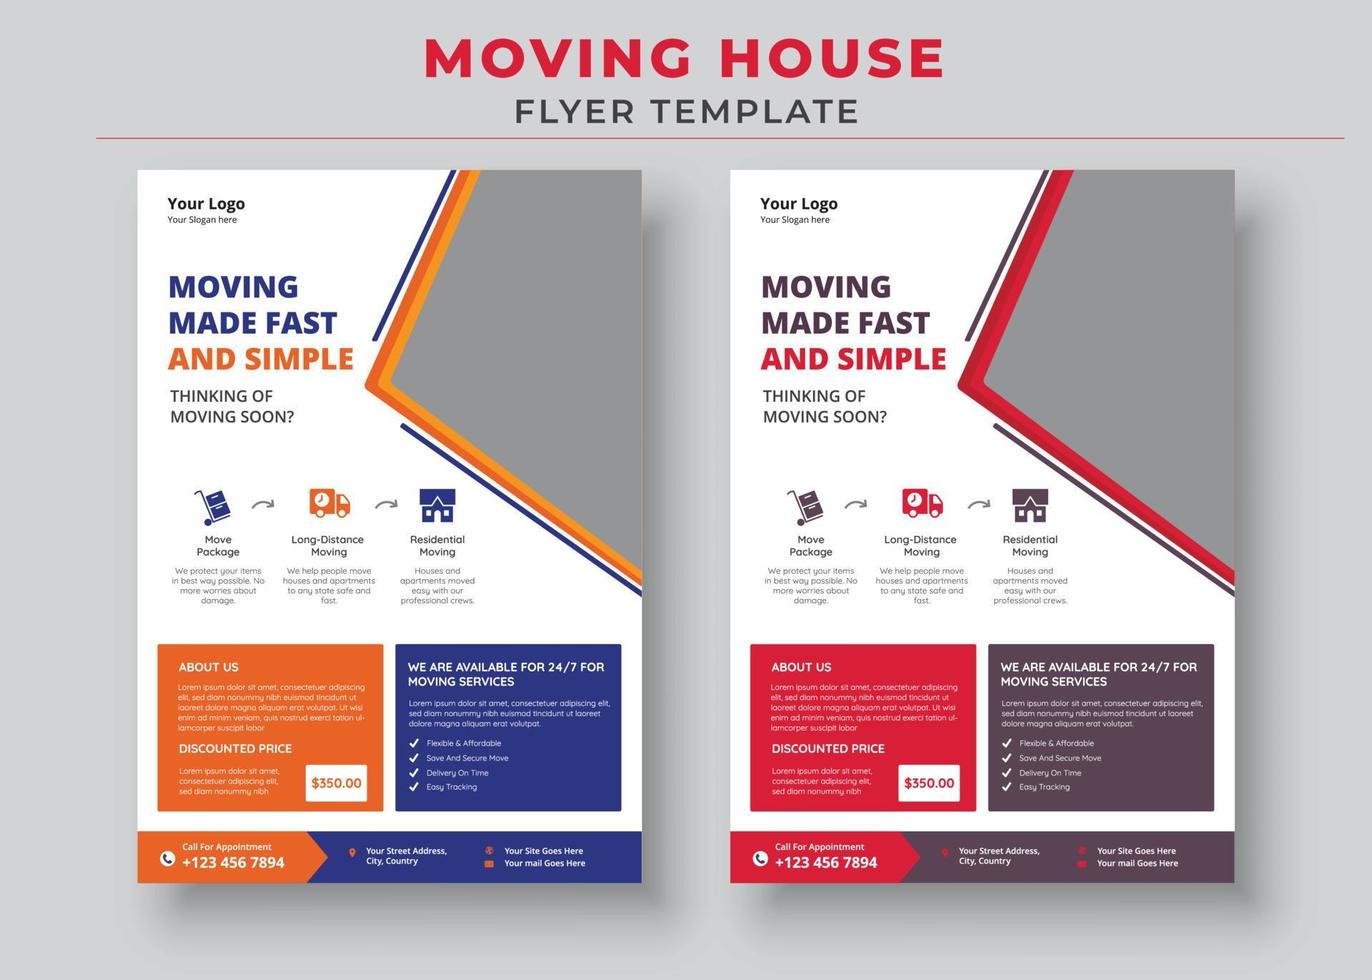 Moving House Flyer Templates, Need To Move Flyer, Moving Made Fast And Simple Flyer vector